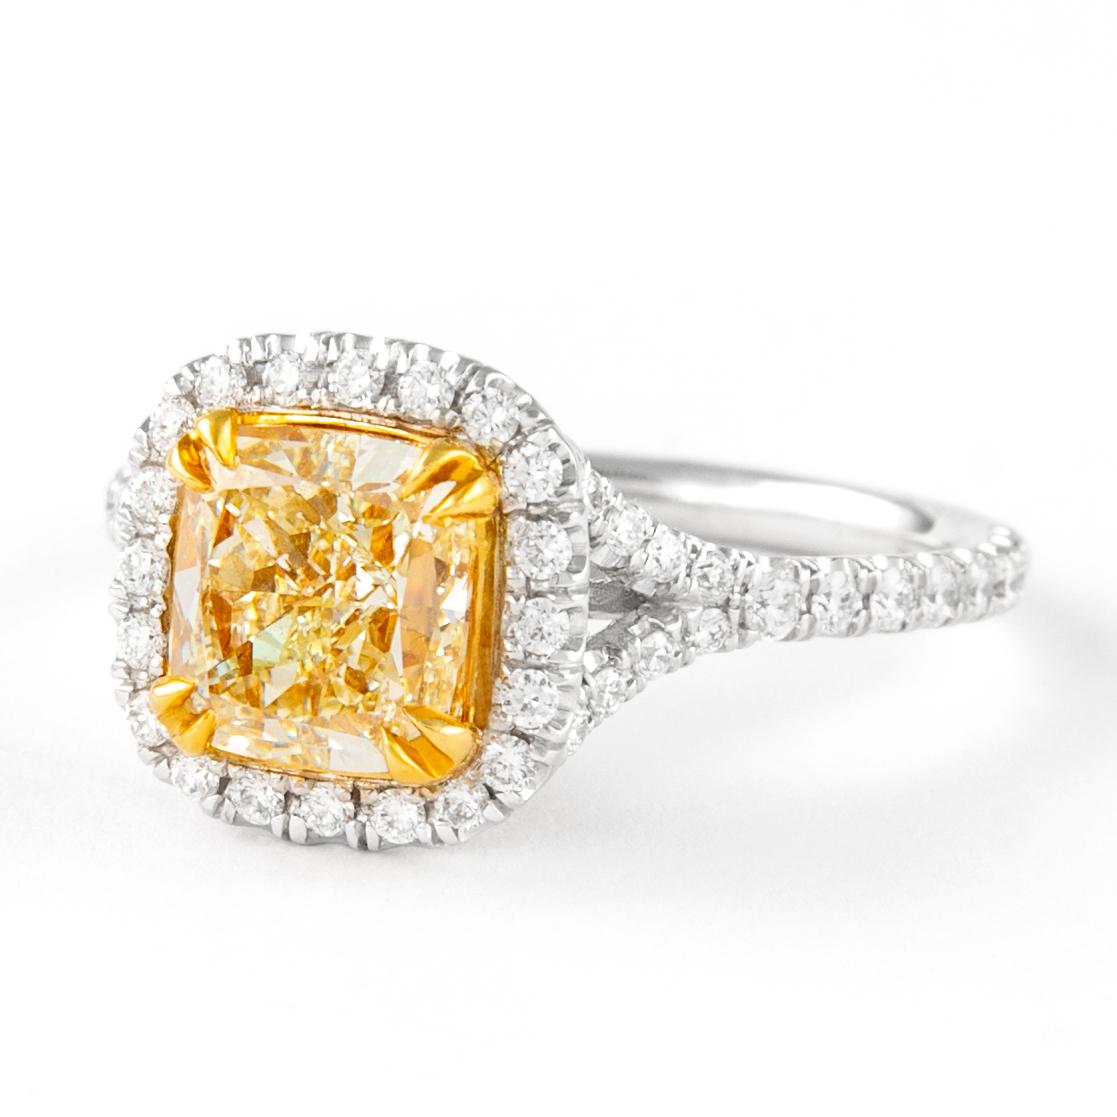 Contemporary Alexander 2.07ct Fancy Intense Yellow VS1 Cushion Diamond with Halo Ring 18k For Sale